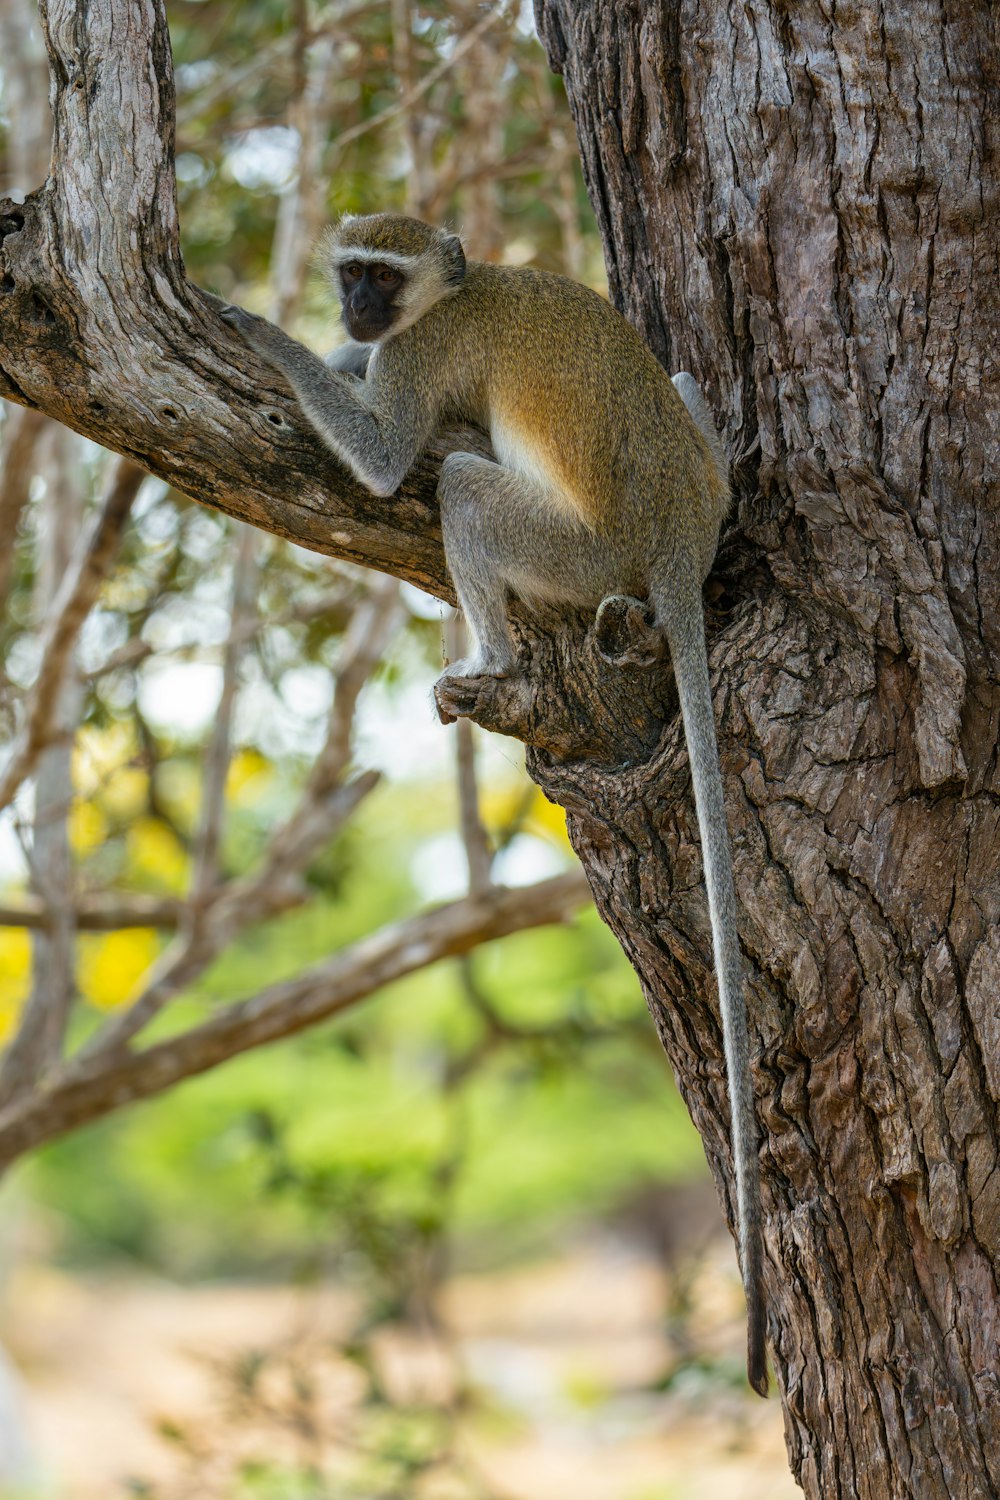 a monkey is climbing up a tree branch